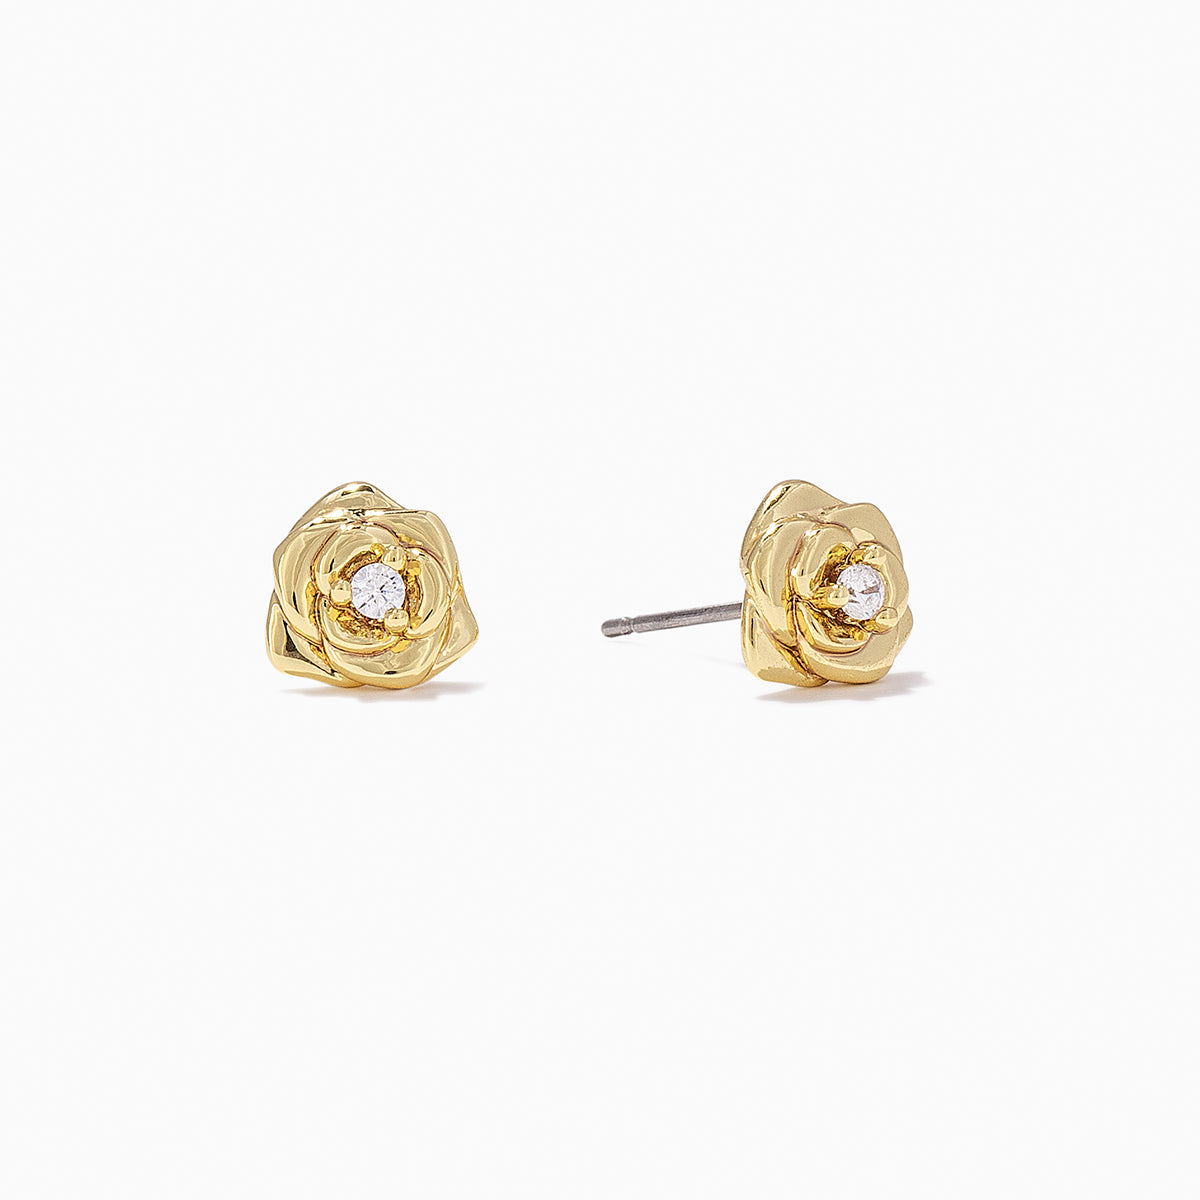 27 Stud Statement Earrings - Cool Rose Gold and Silver Stud Earrings for  Women